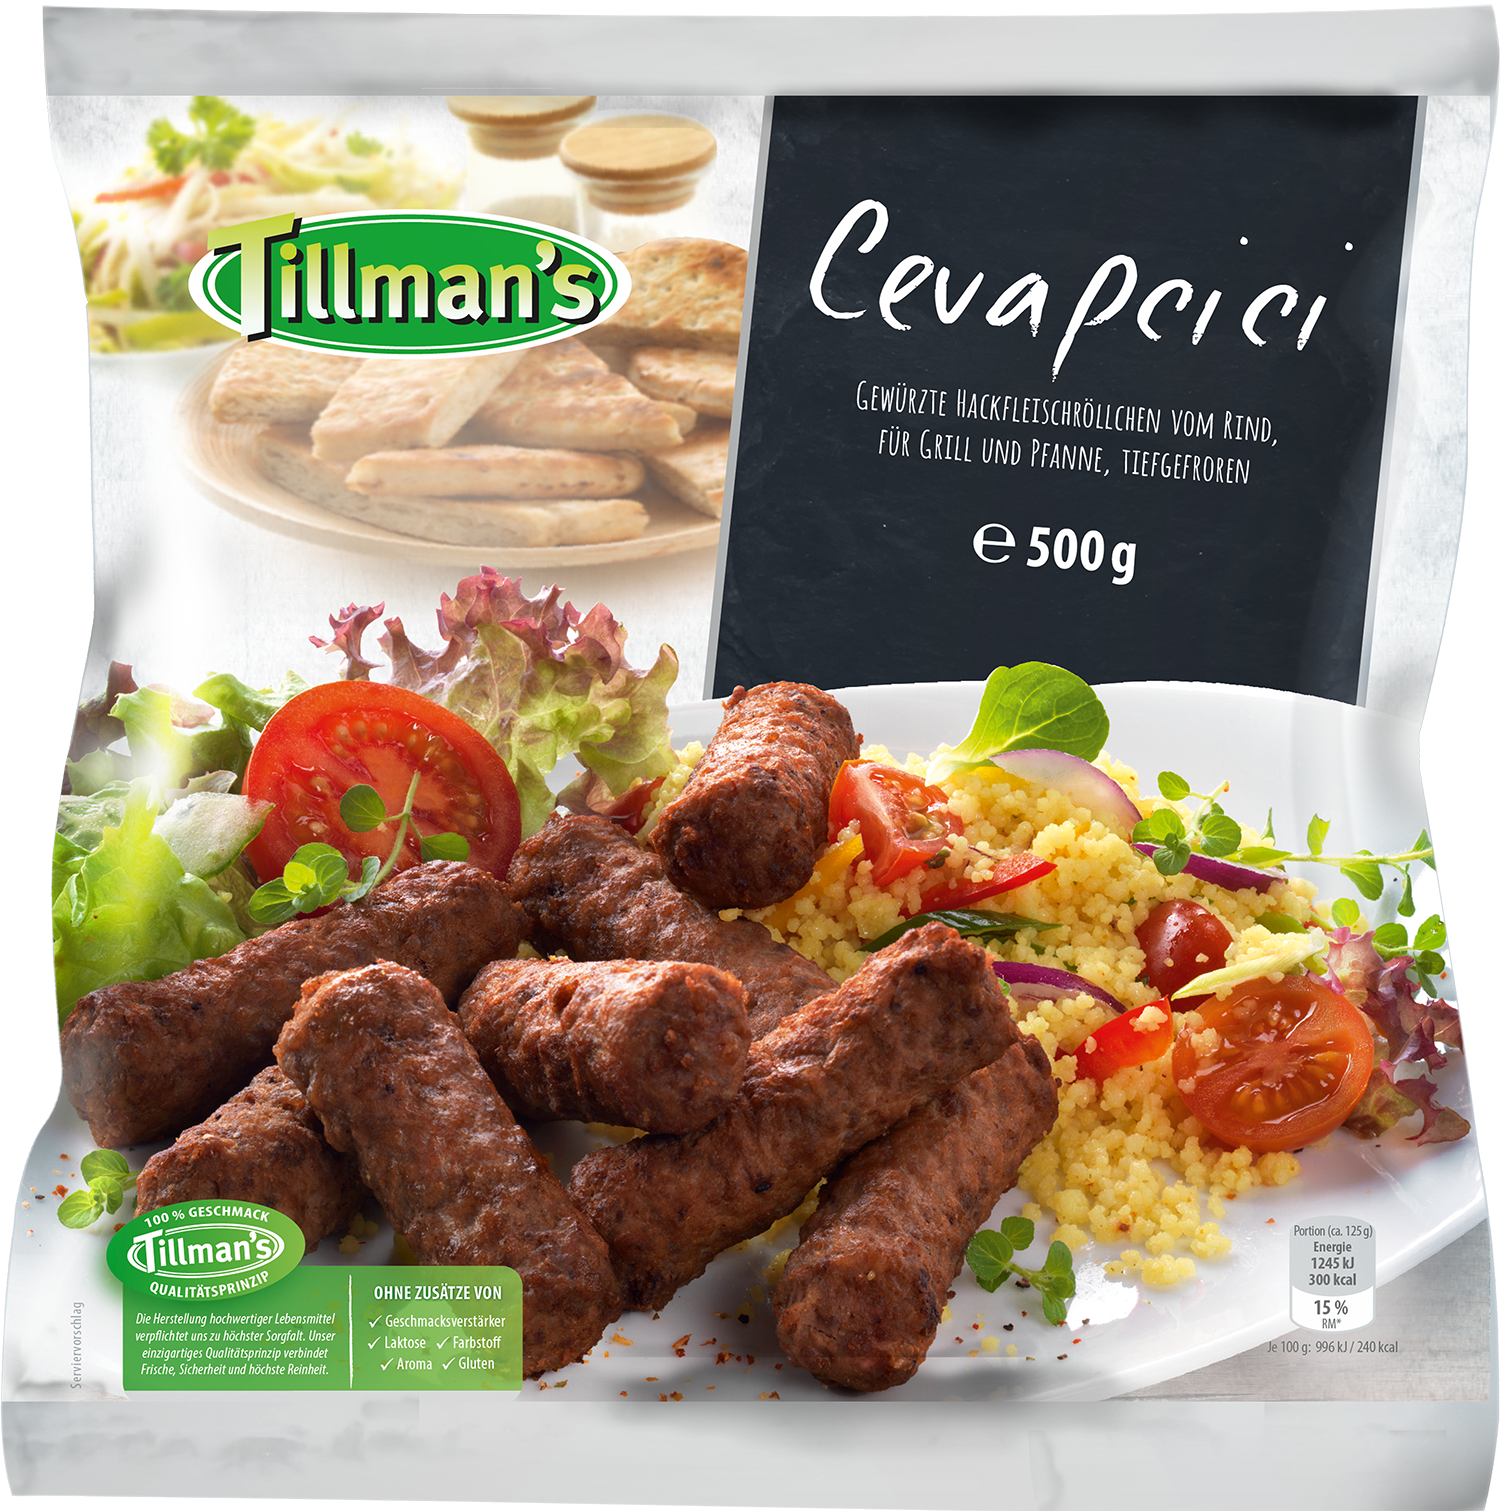 Cevapcici vom Rind - 500g (500 grams) Tillman's Convenience GmbH Beef -  Prepared/Processed Food / Beverage / Tobacco Meat/Poultry/Sausages  Meat/Poultry - Prepared/Processed · mynetfair